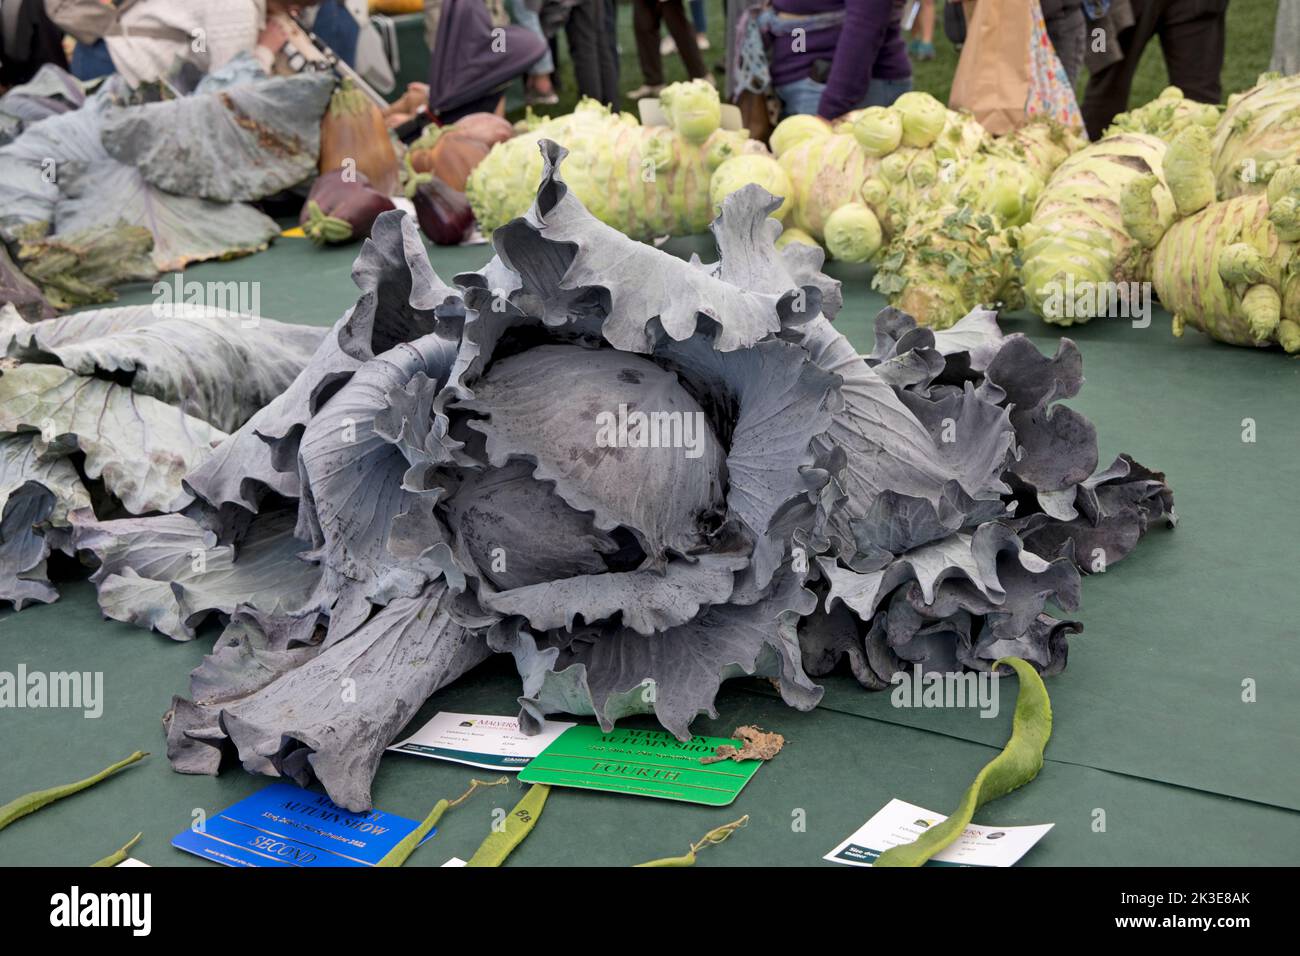 Giant cabbags are some of the giant vegetables at Three Counties Autumn Show  Great Malvern, UK Stock Photo